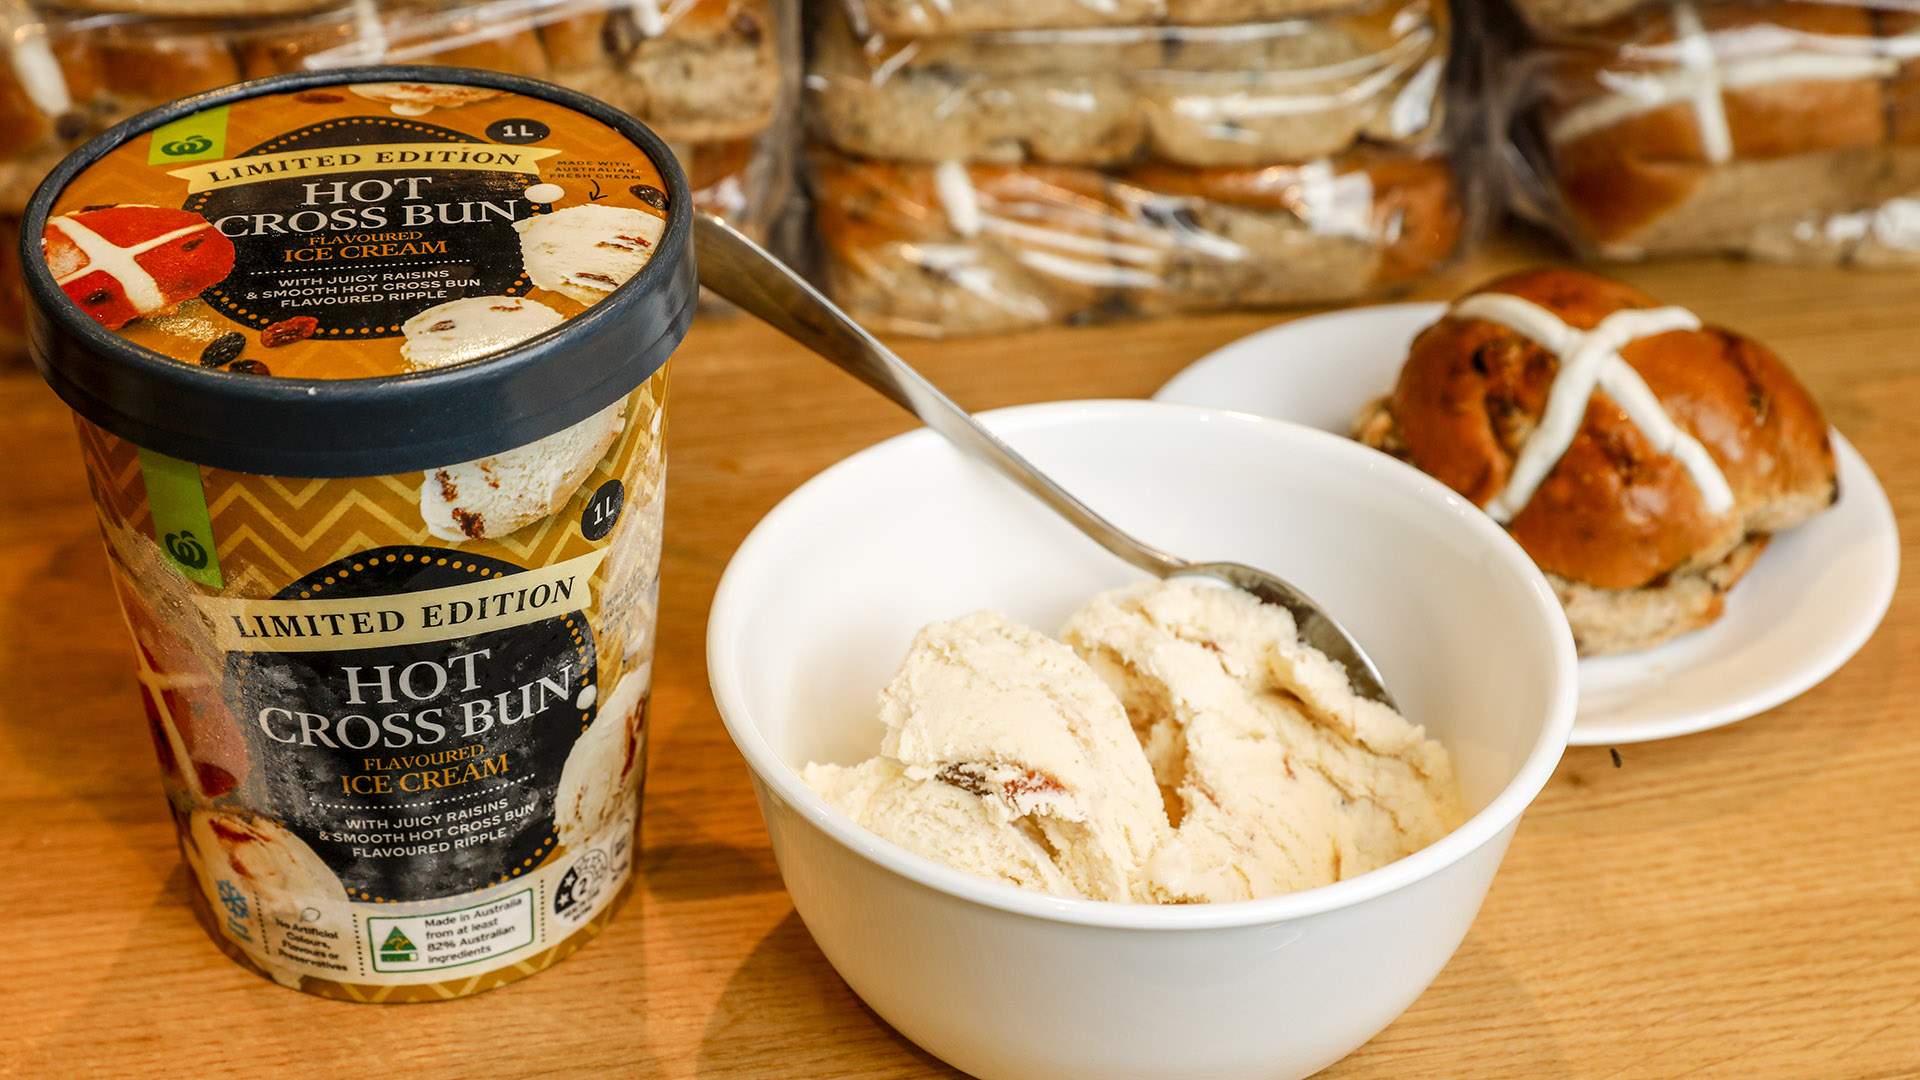 Hot Cross Bun Ice Cream Is Your New Go-To Dessert From Now Until Easter